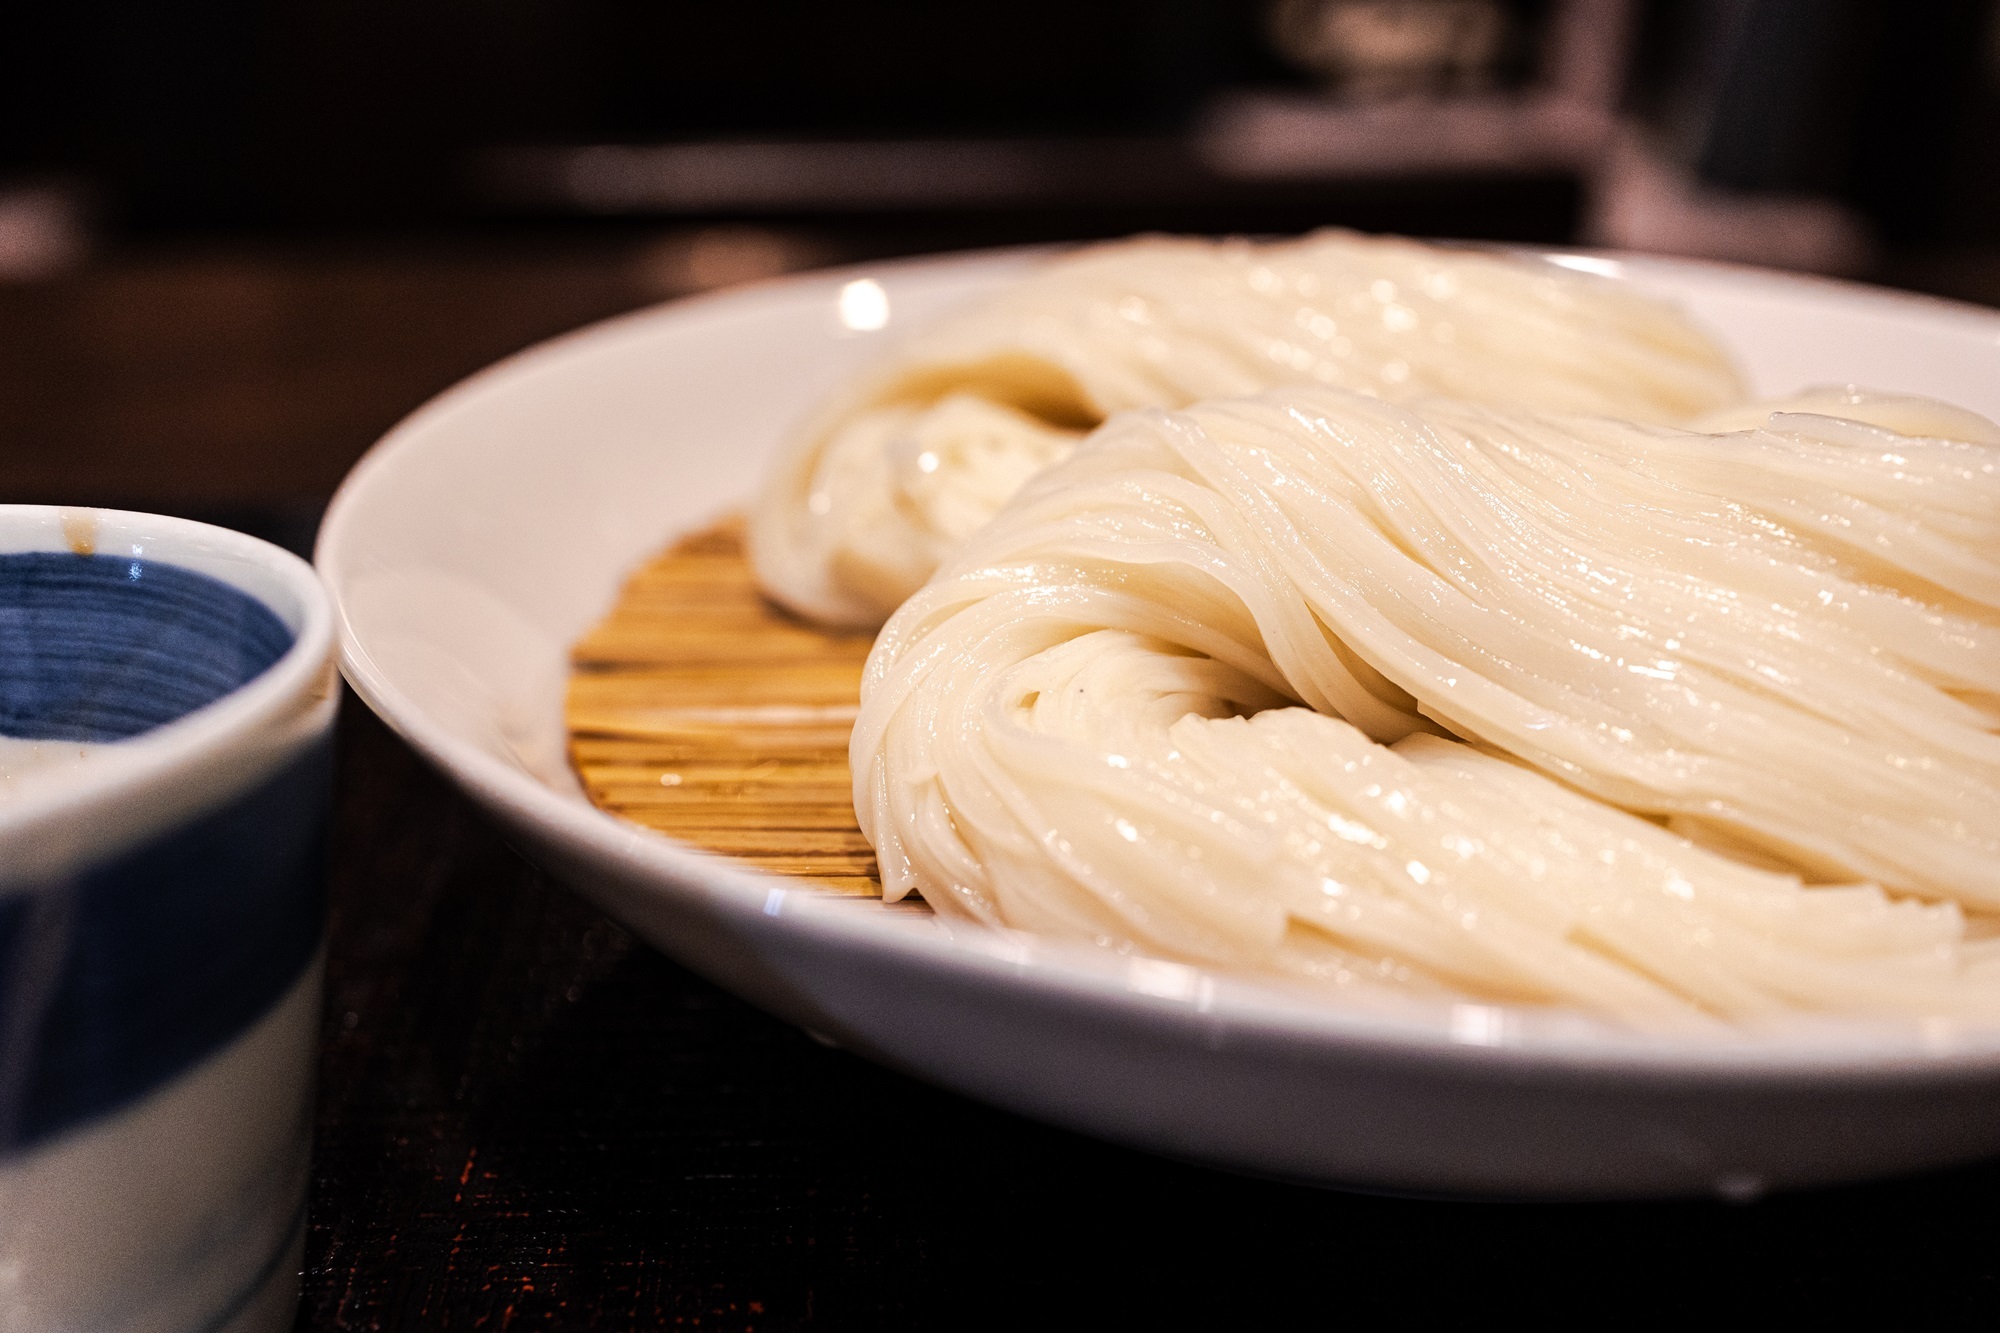 Dashi Okume is doing an udon omakase in Greenpoint